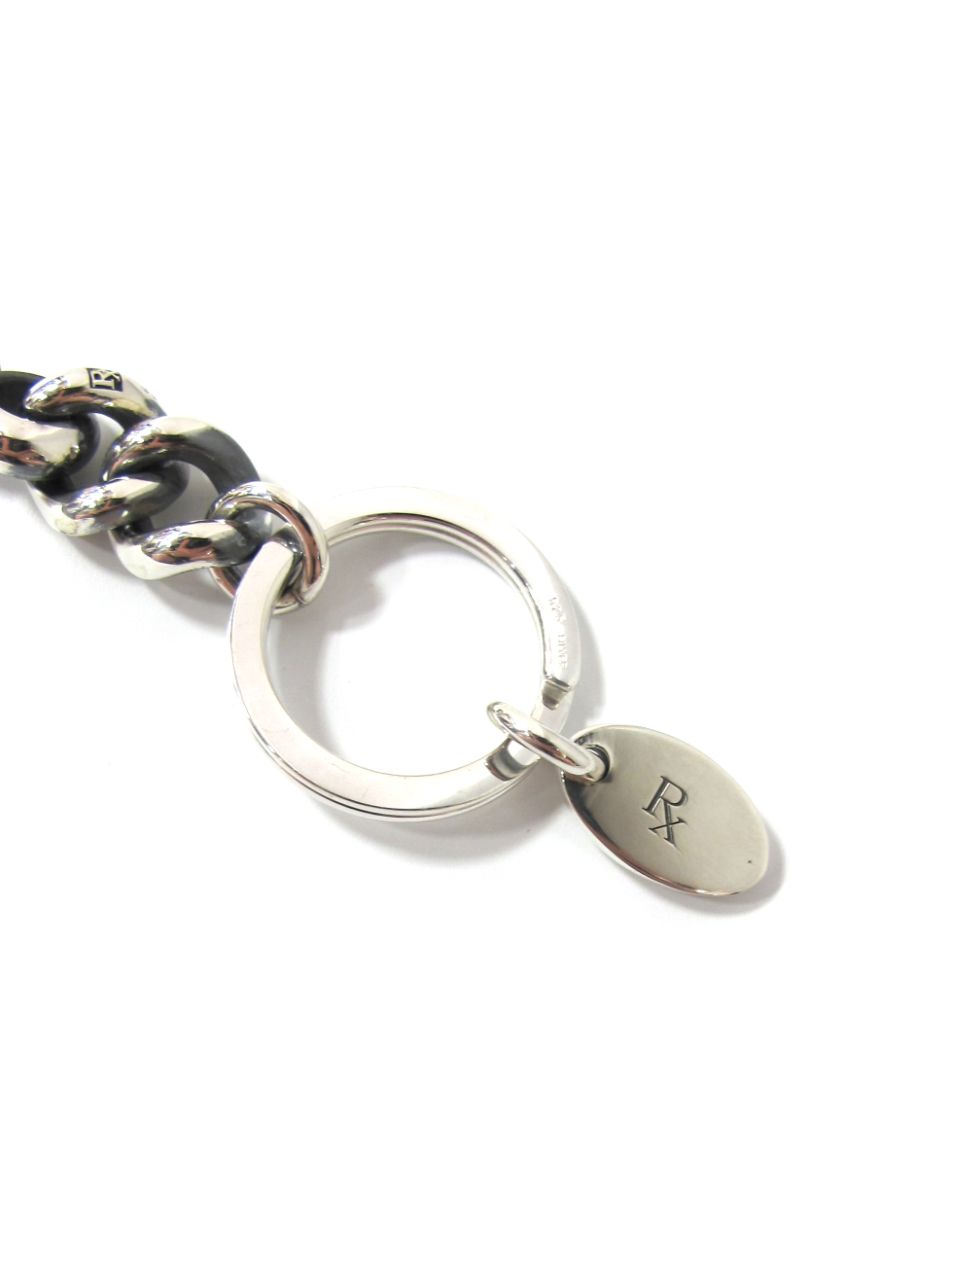 ANTIDOTE BUYERS CLUB - CLASSIC KEY CHAIN (SILVER) / クラシックキー